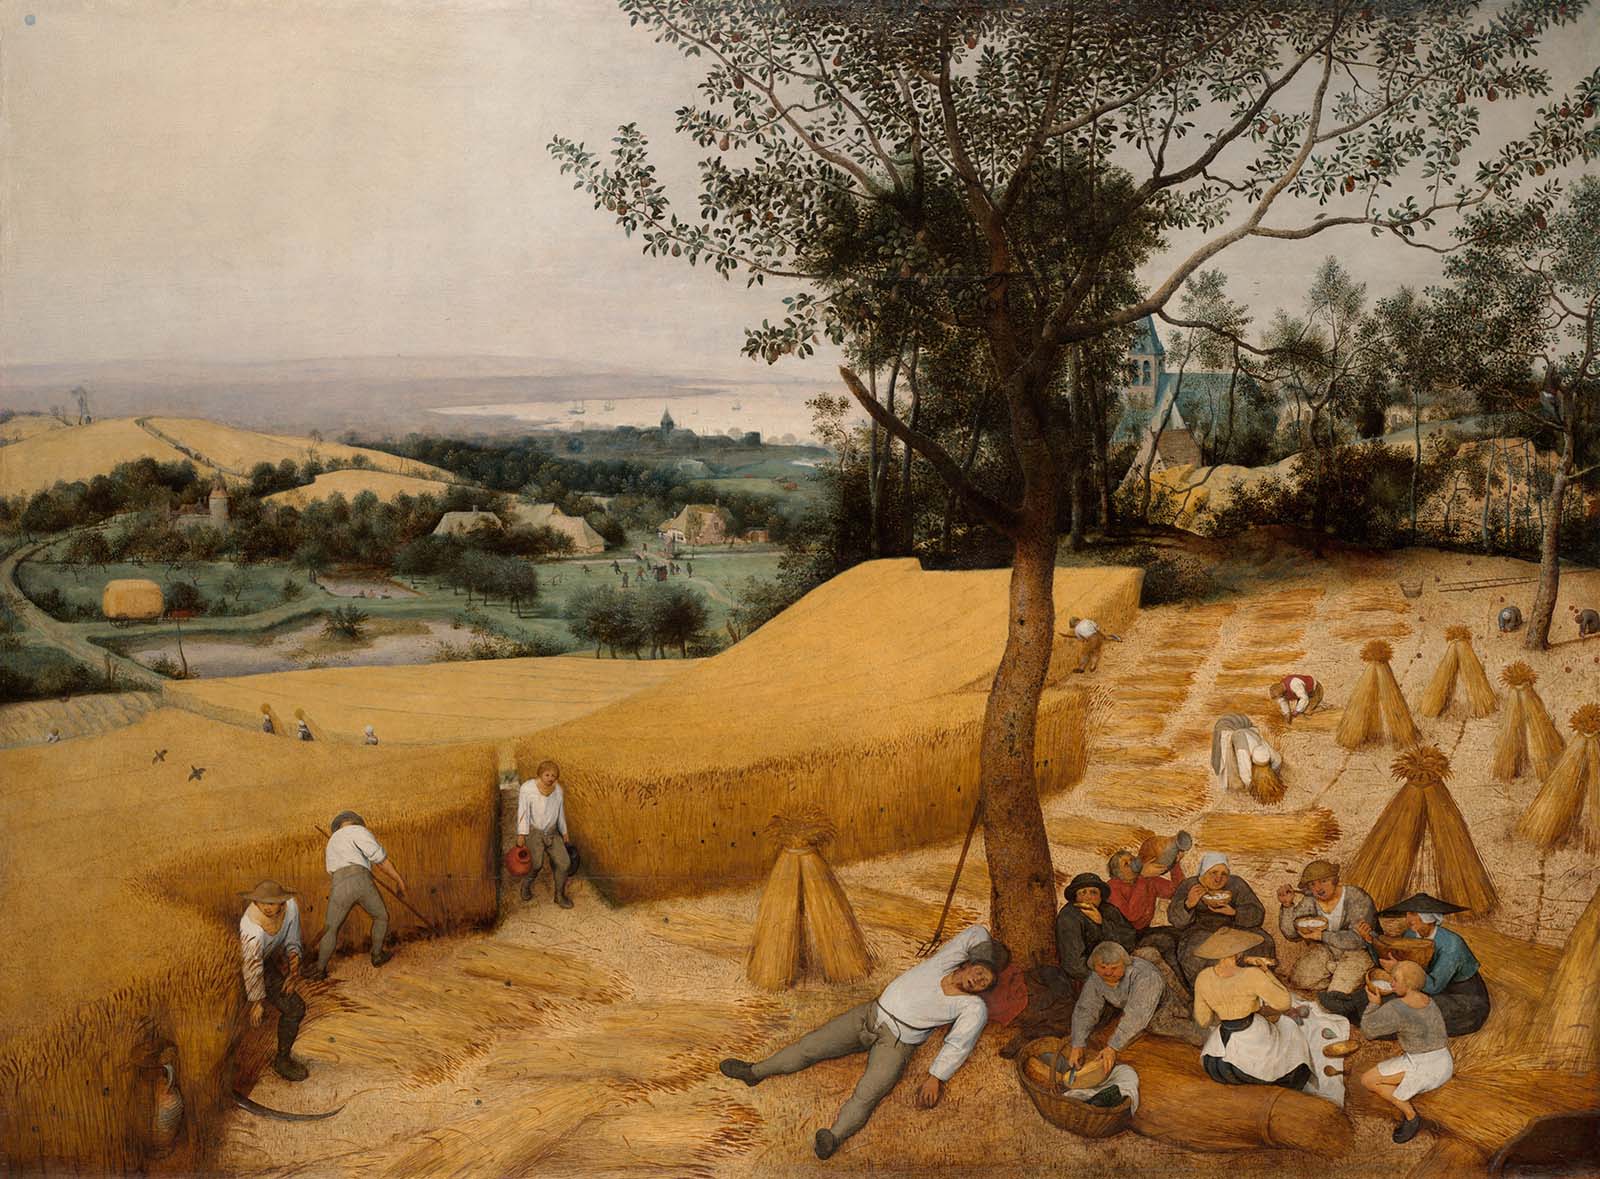 Painting of people on wheat field, some are working and others are eating and resting under a tree.